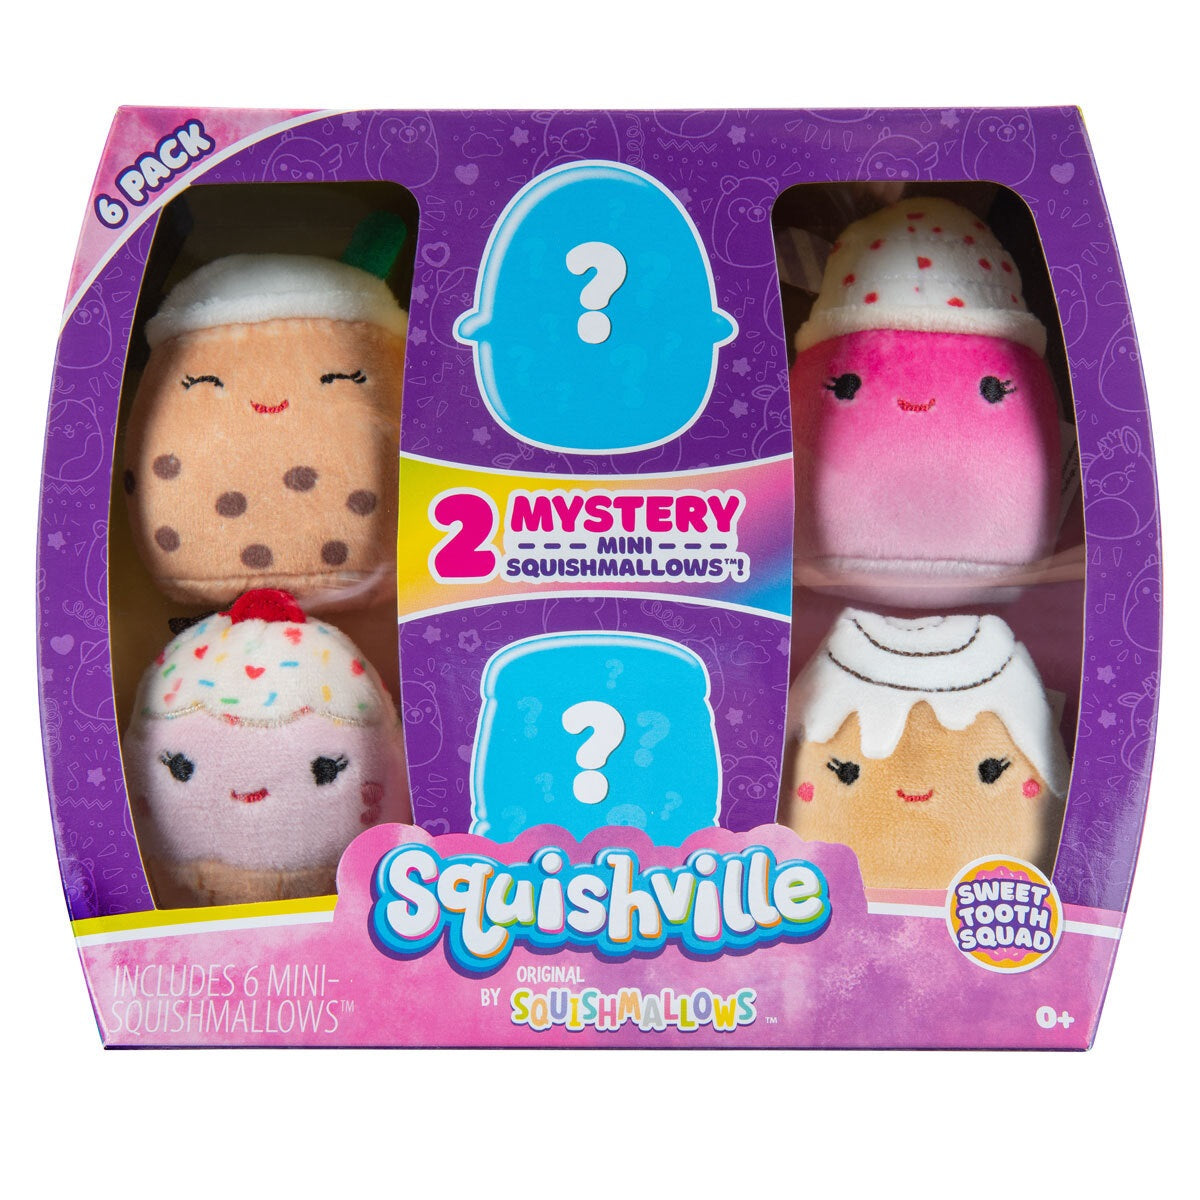 Squishville 2' Mini Squishmallows 6 Pack - Sweet Tooth Squad